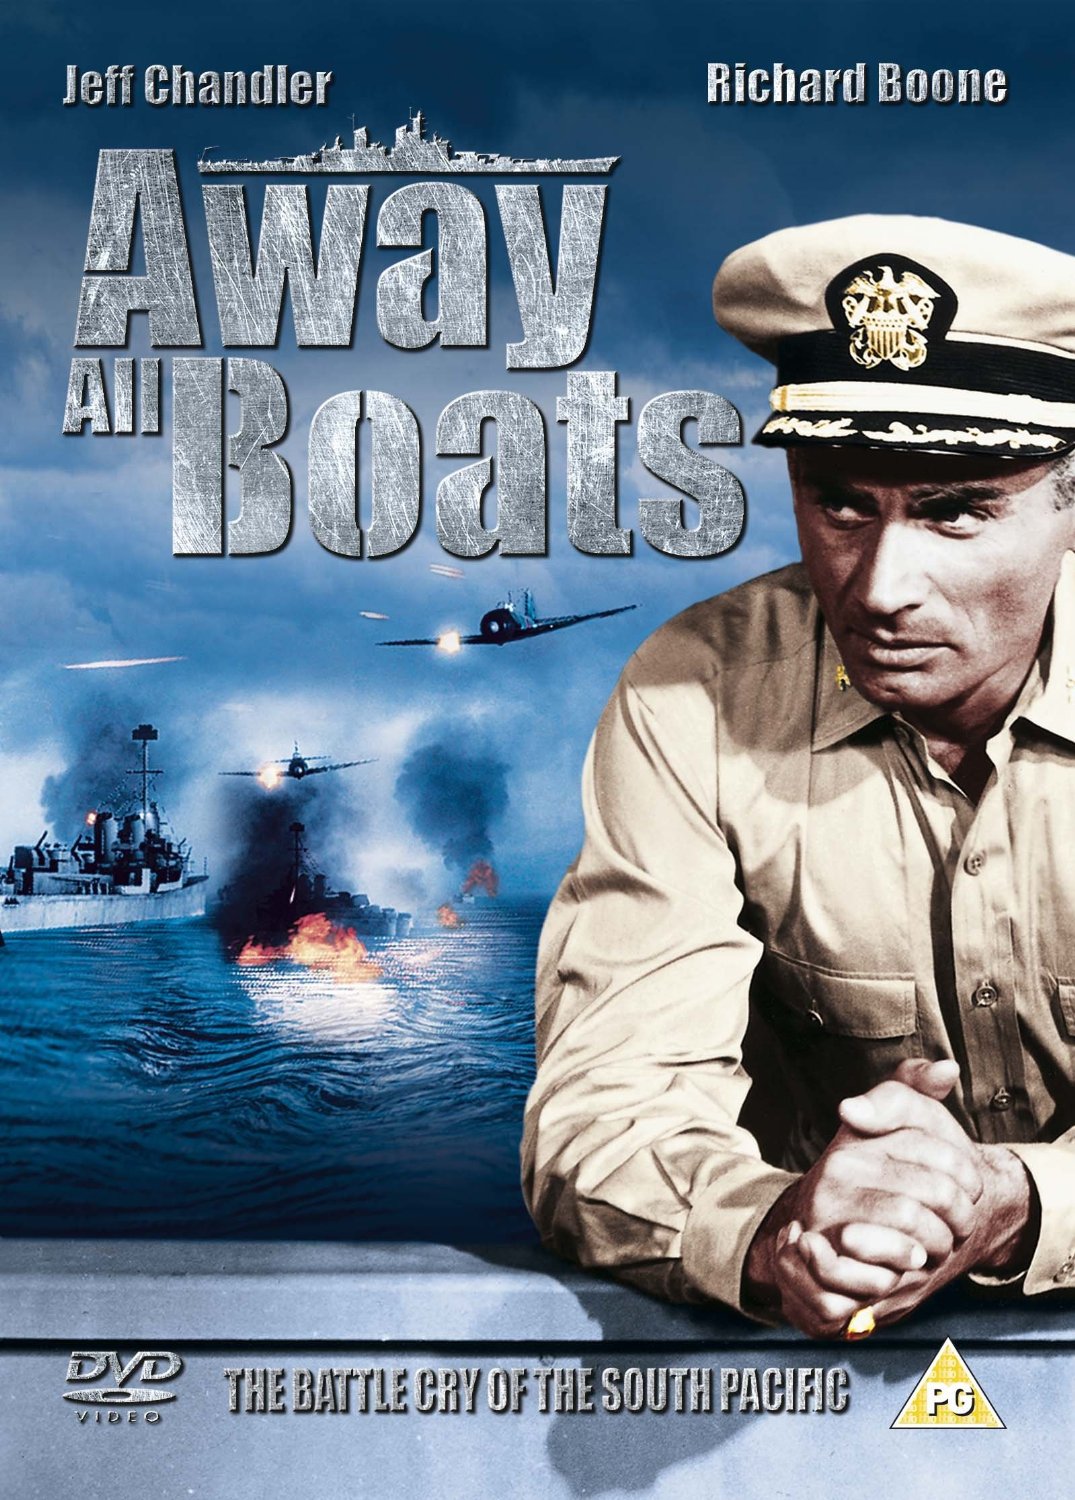 Away All Boats (DVD)